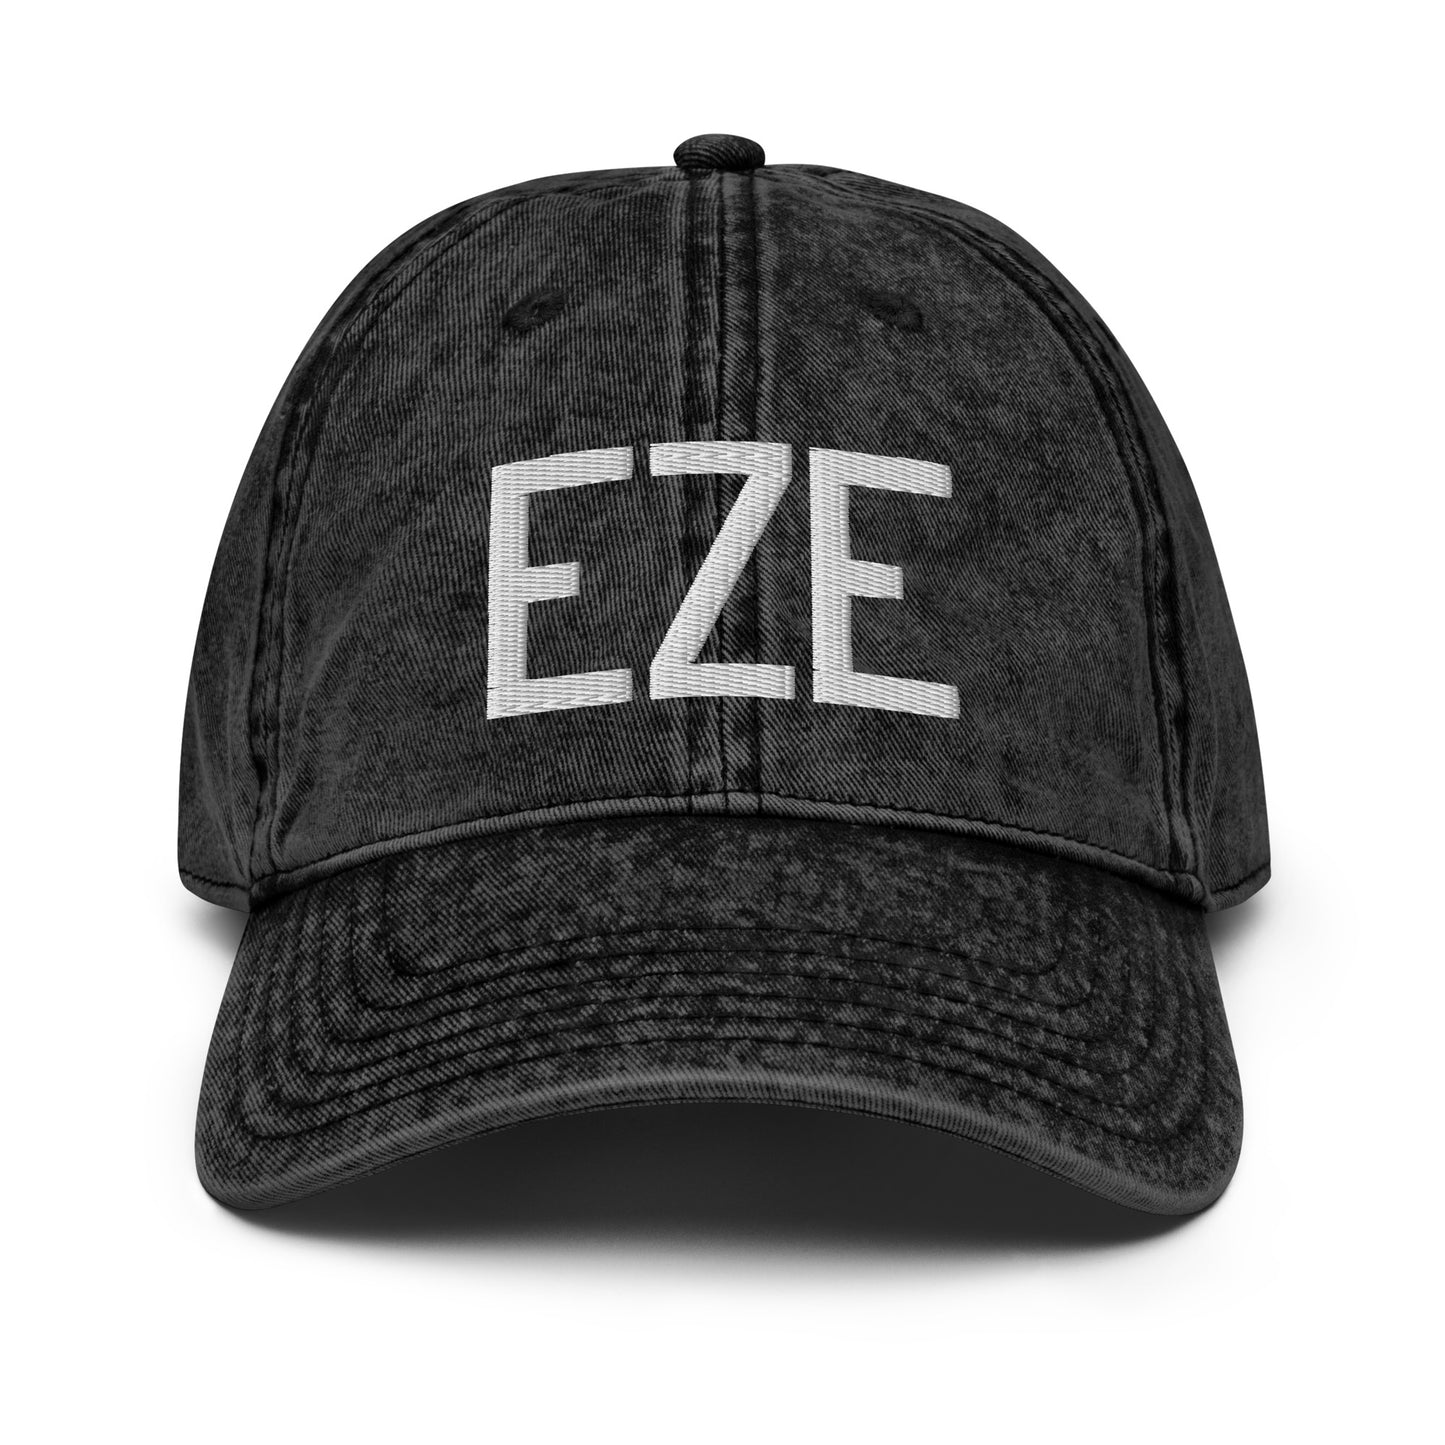 Airport Code Twill Cap - White • EZE Buenos Aires • YHM Designs - Image 14